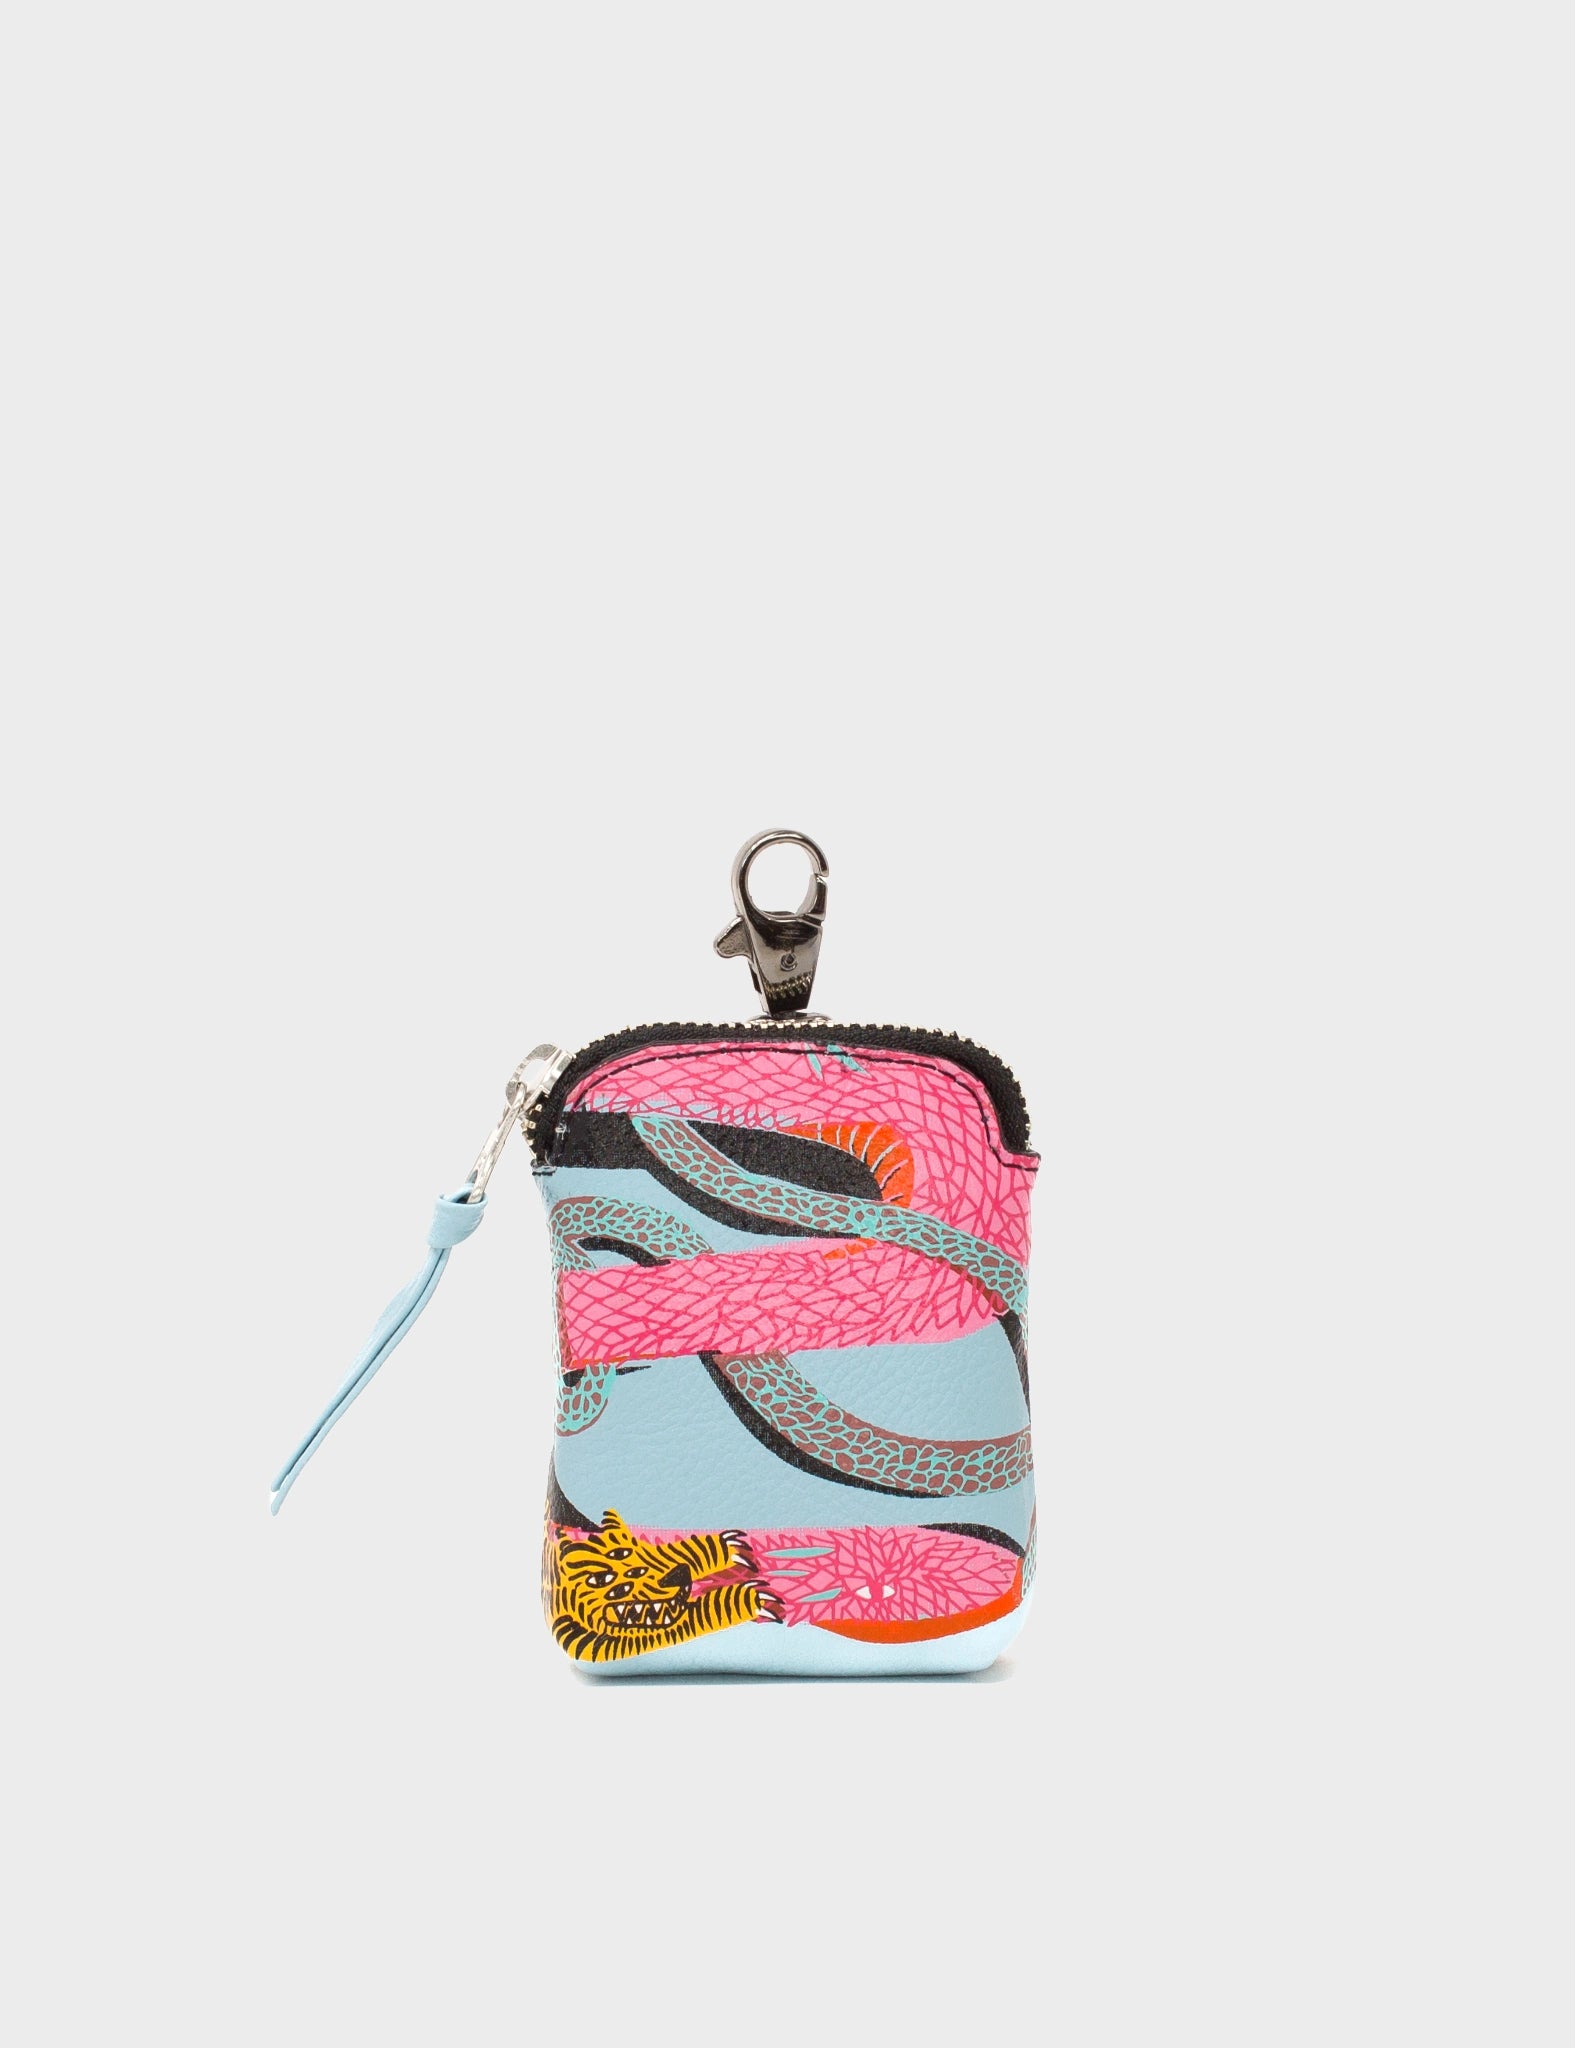 Pouch Charm - Stratosphere Blue Leather Keychain Tiger and Snake Print